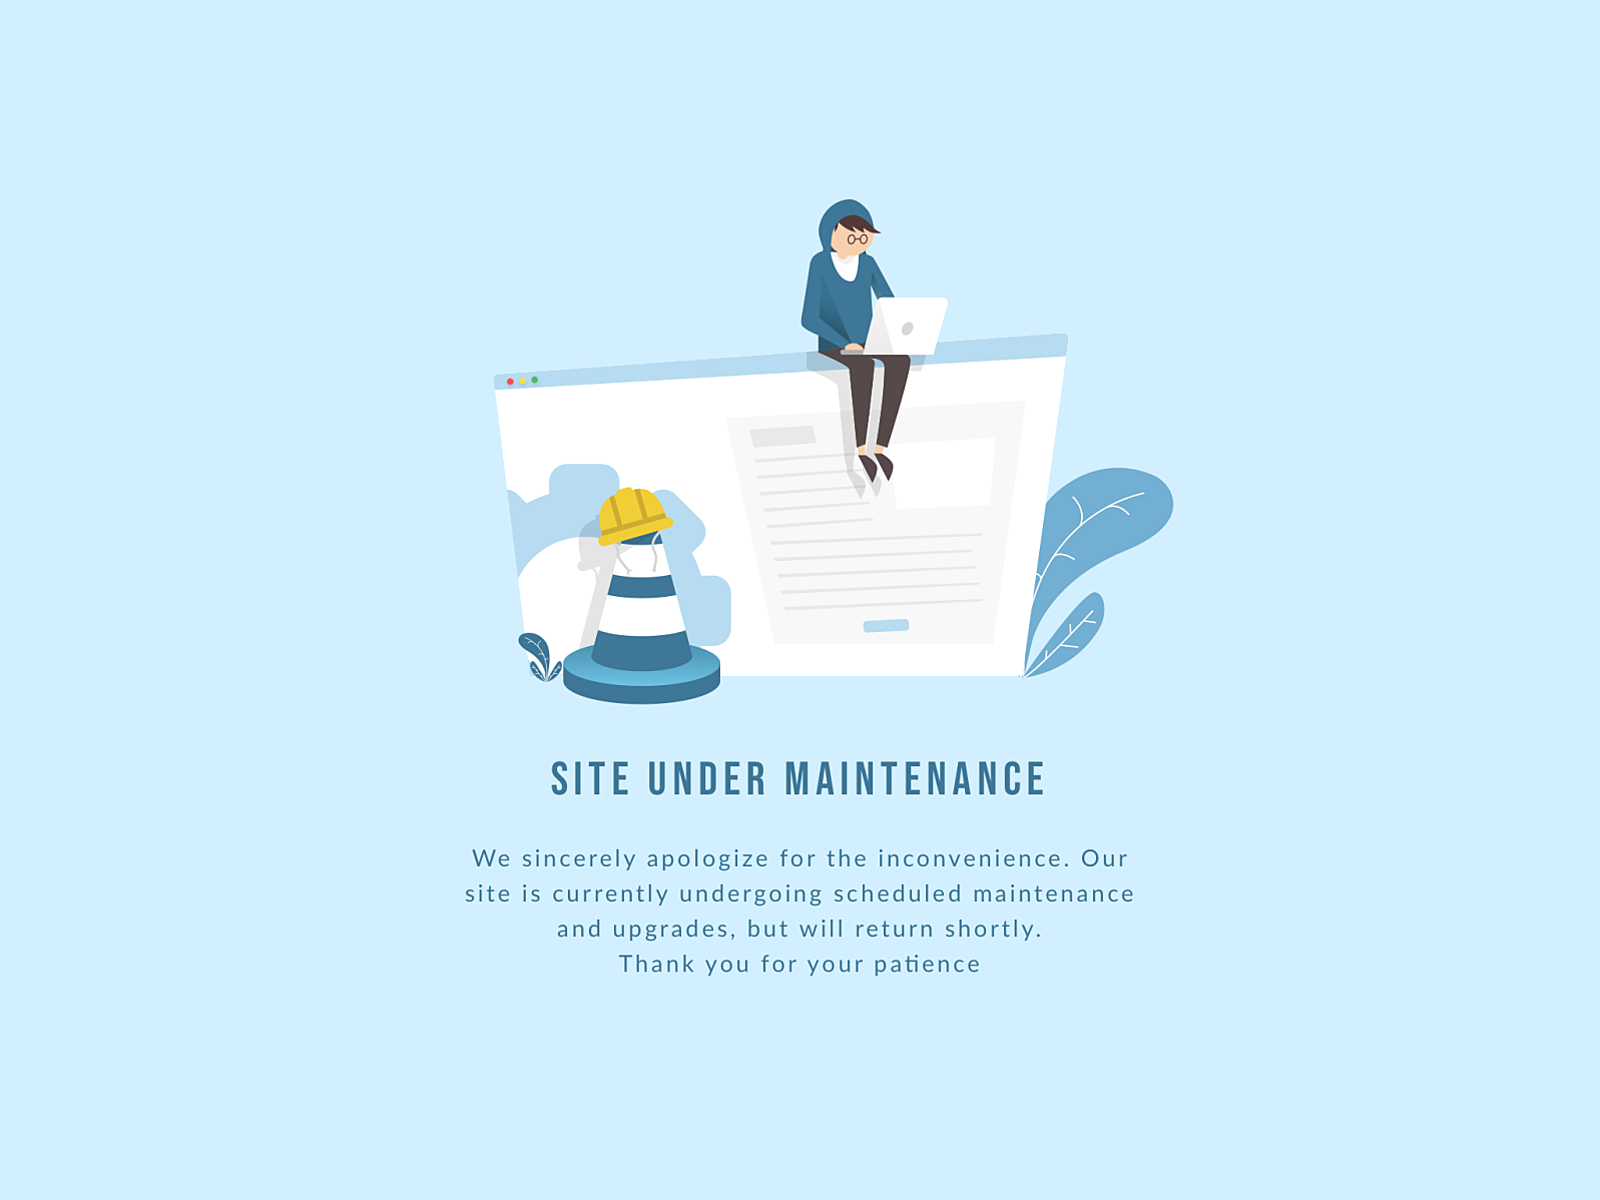 This site is down for maintenance